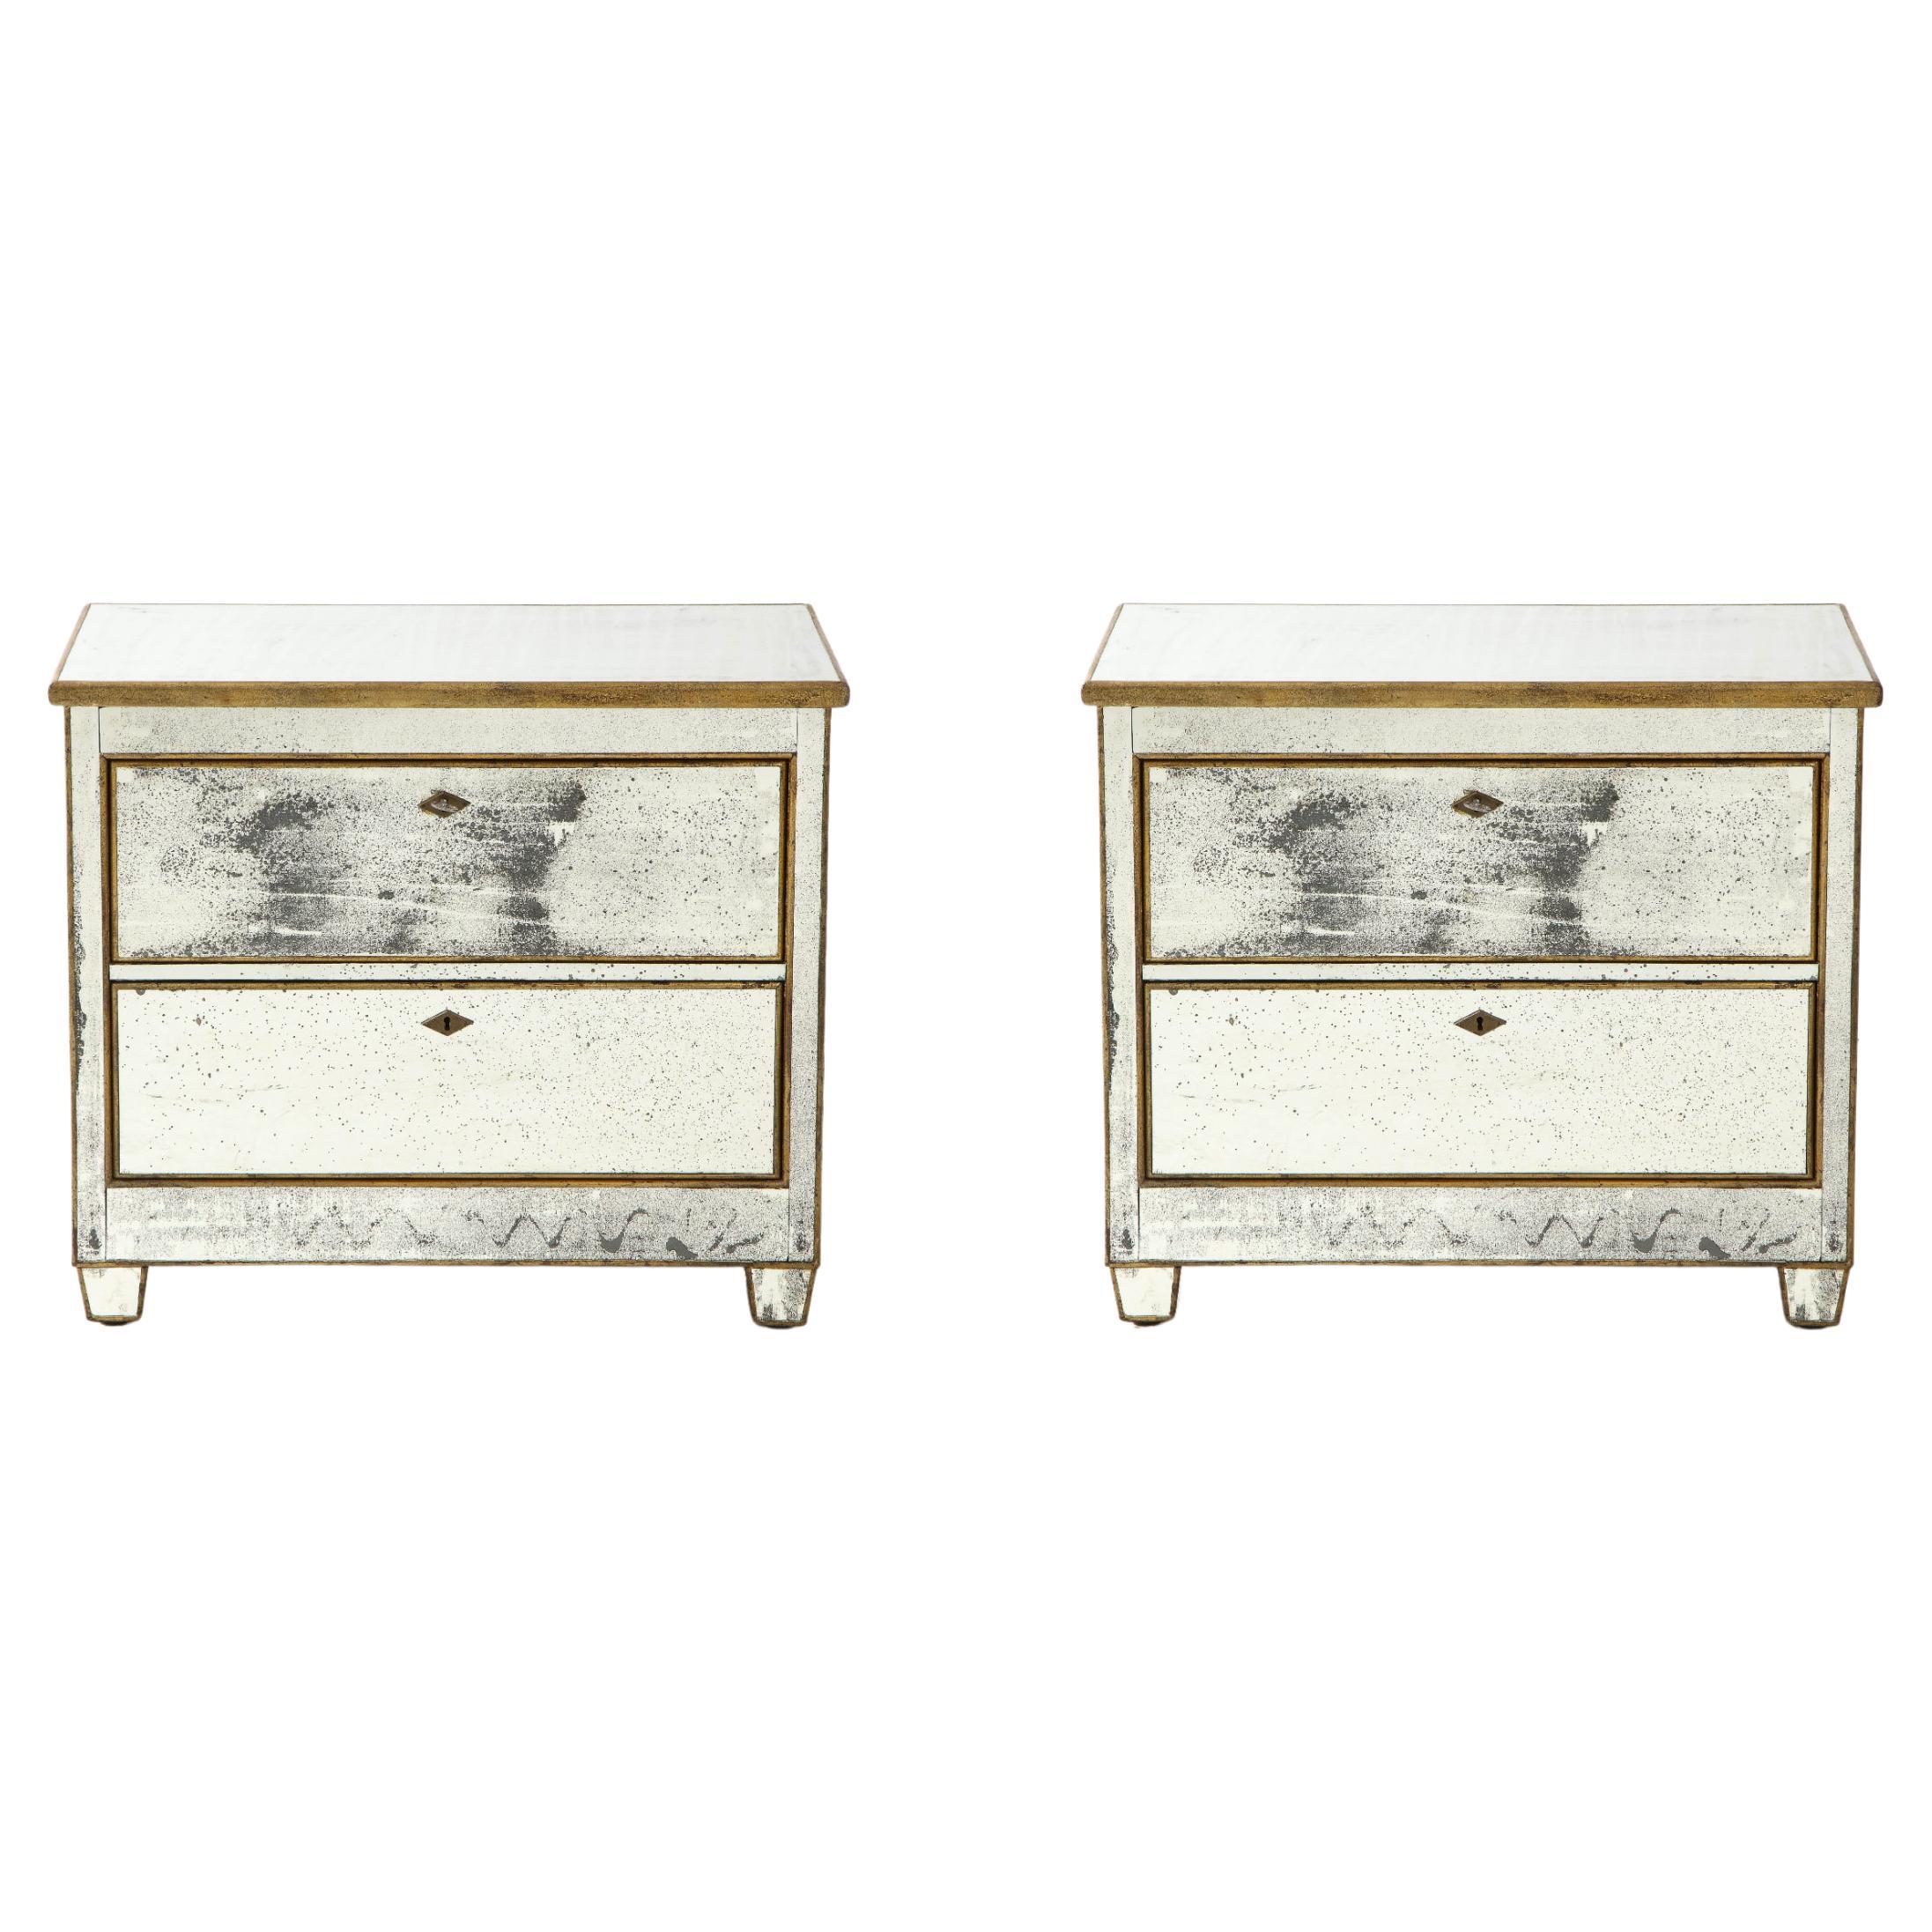 Pair of Mirrored Two Drawer Chests